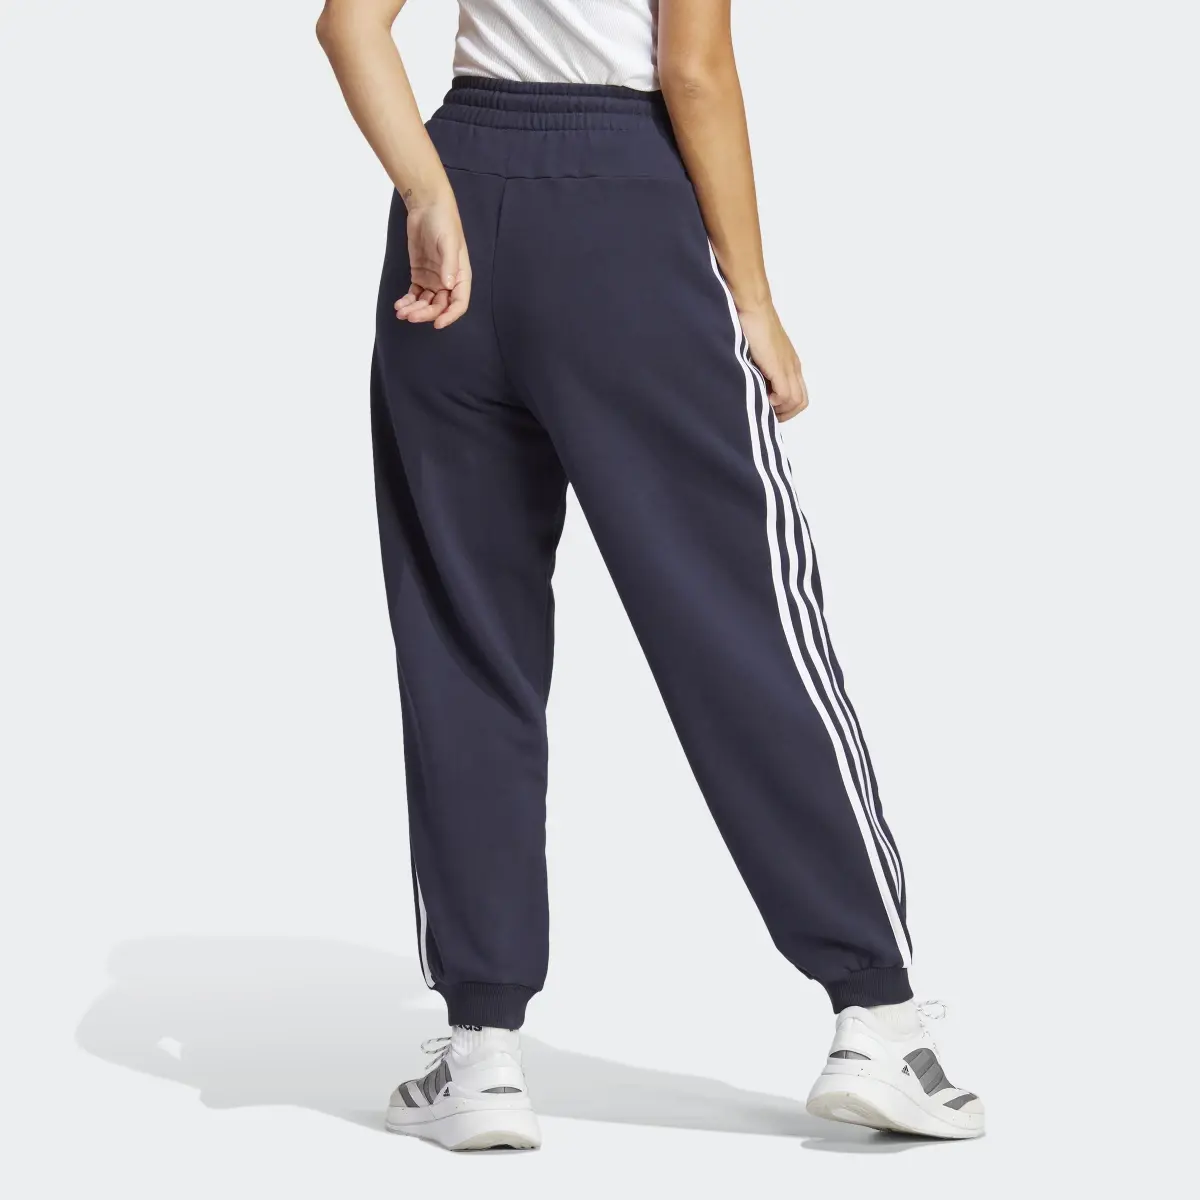 Adidas Essentials 3-Stripes French Terry Loose-Fit Pants. 2